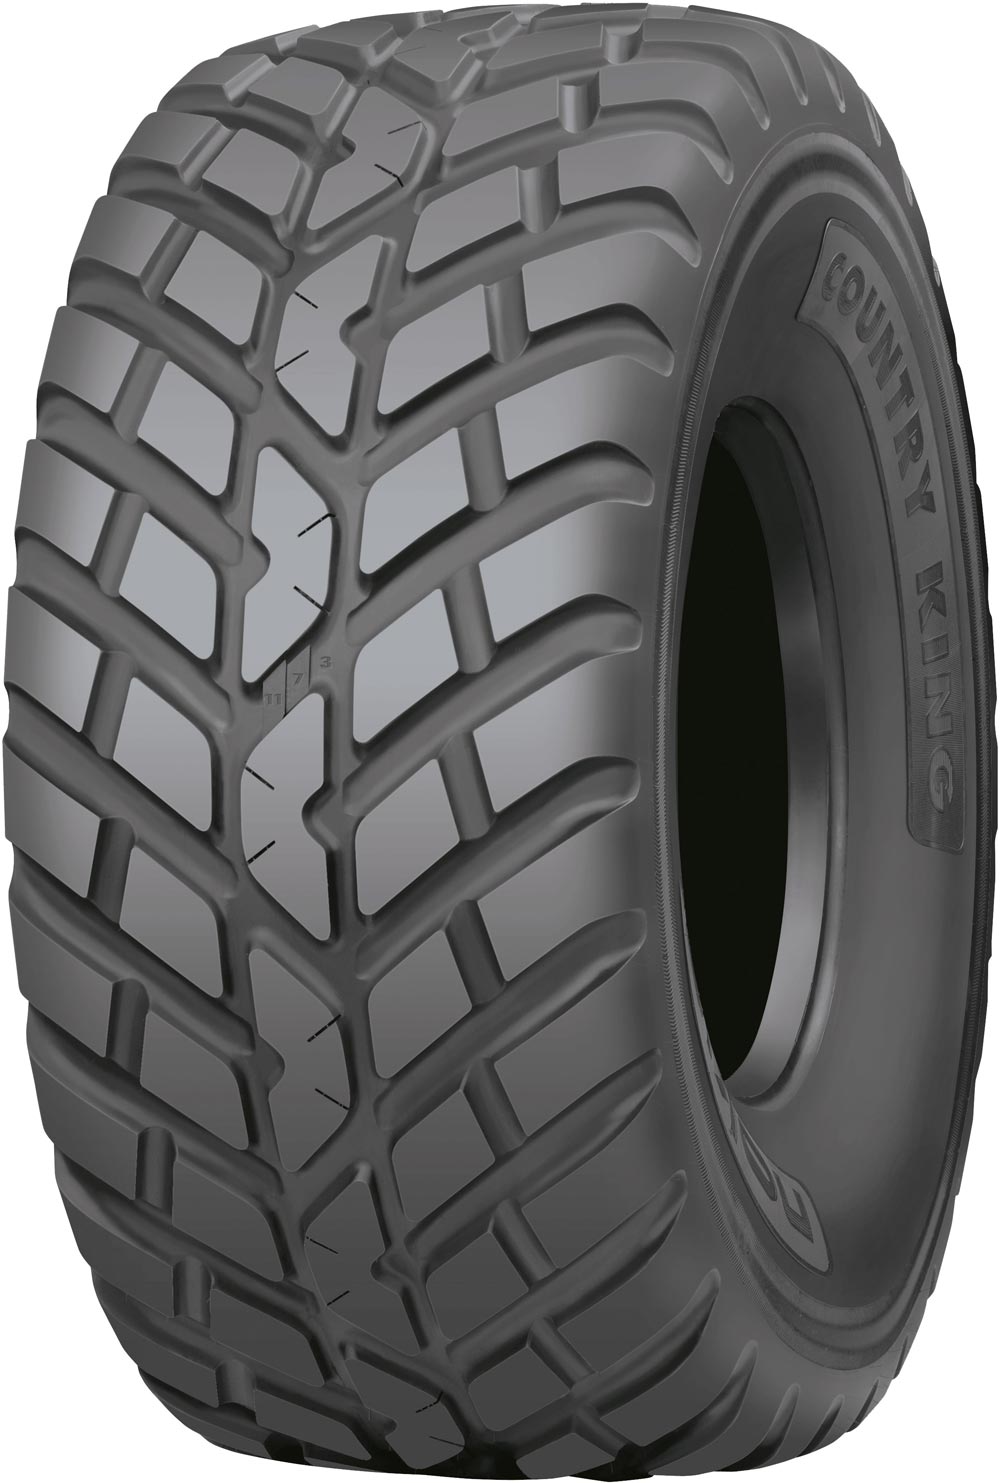 Индустриални гуми NOKIAN COUNTRY KING TL 650/50 R22.5 163D